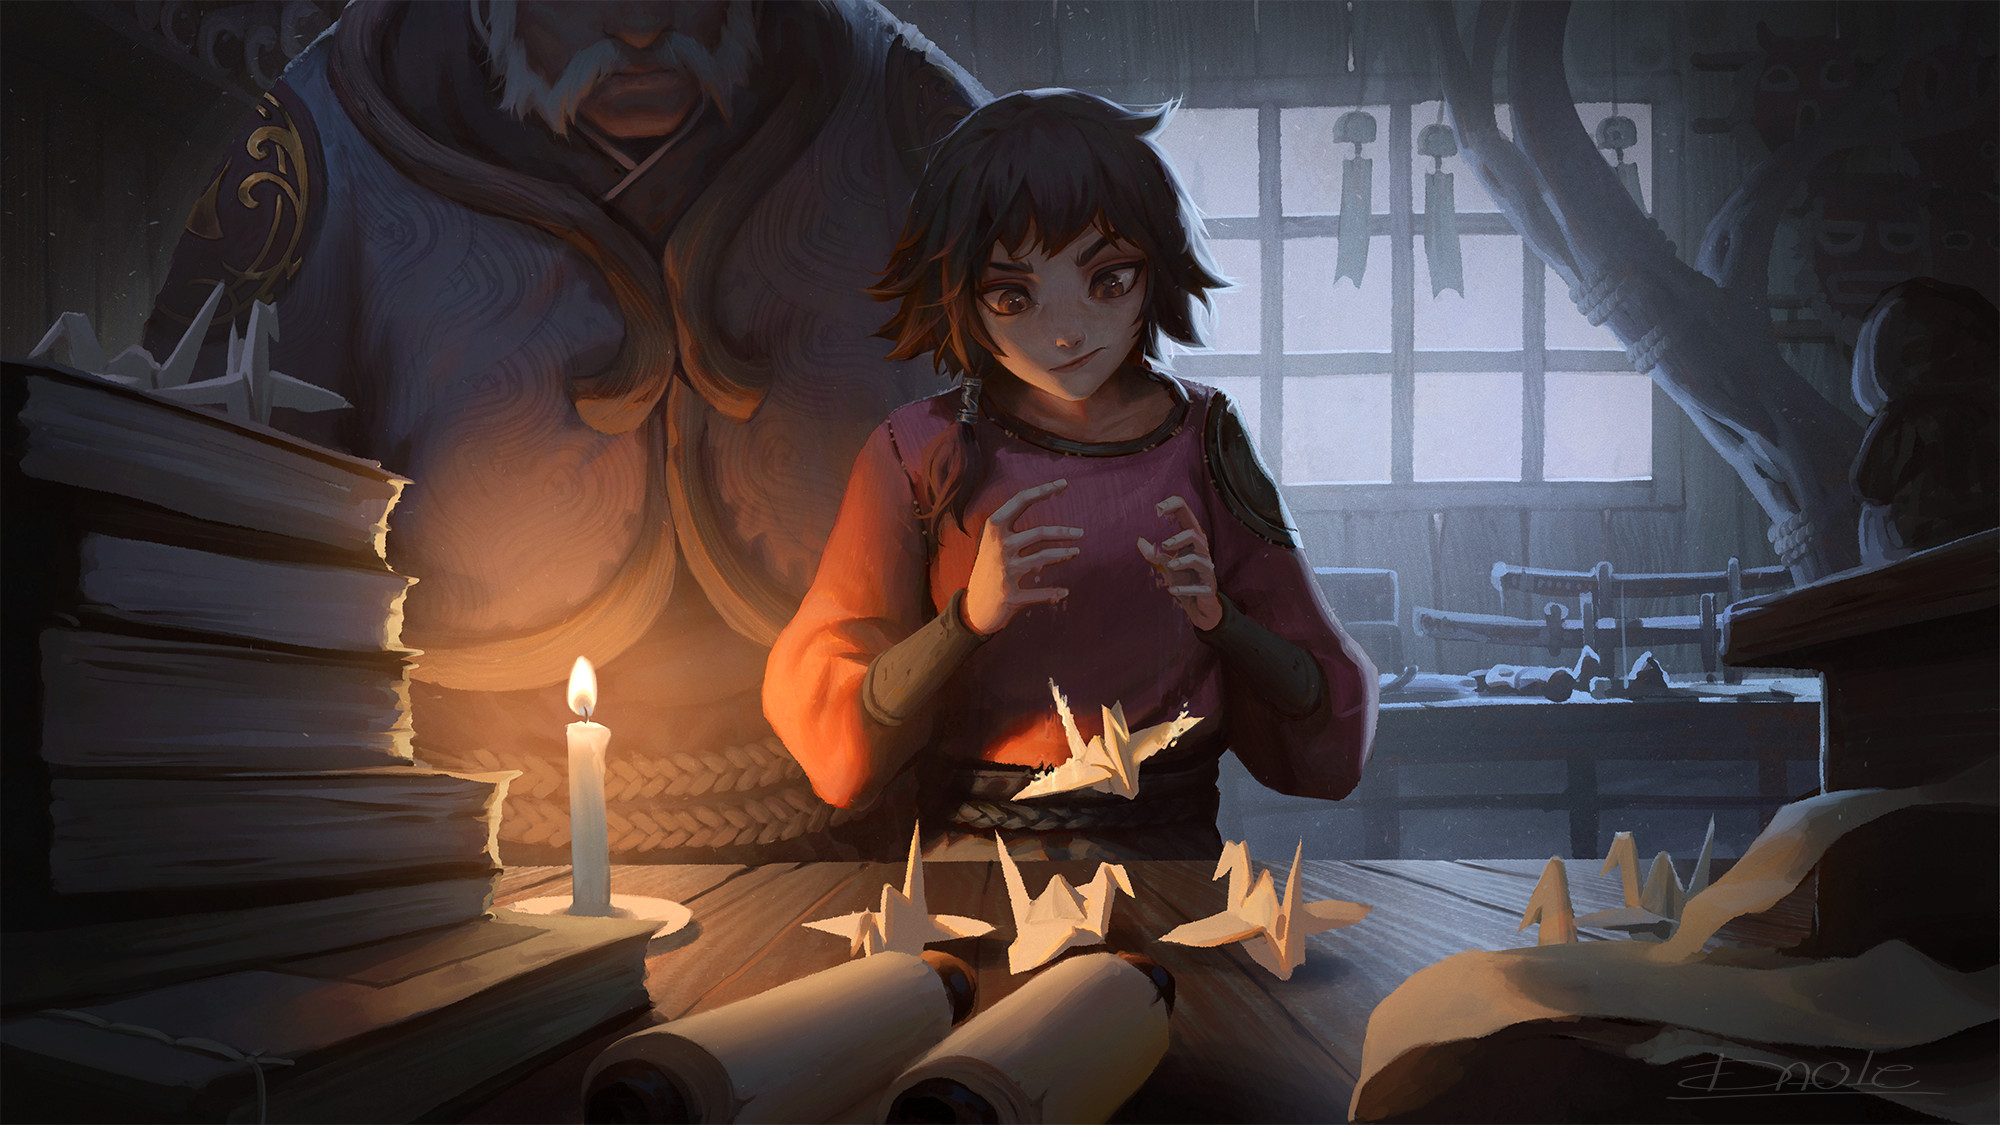 Fantasy Art Fantasy Girl Artwork Candles Books Watermarked Dao Trong Le 2000x1125